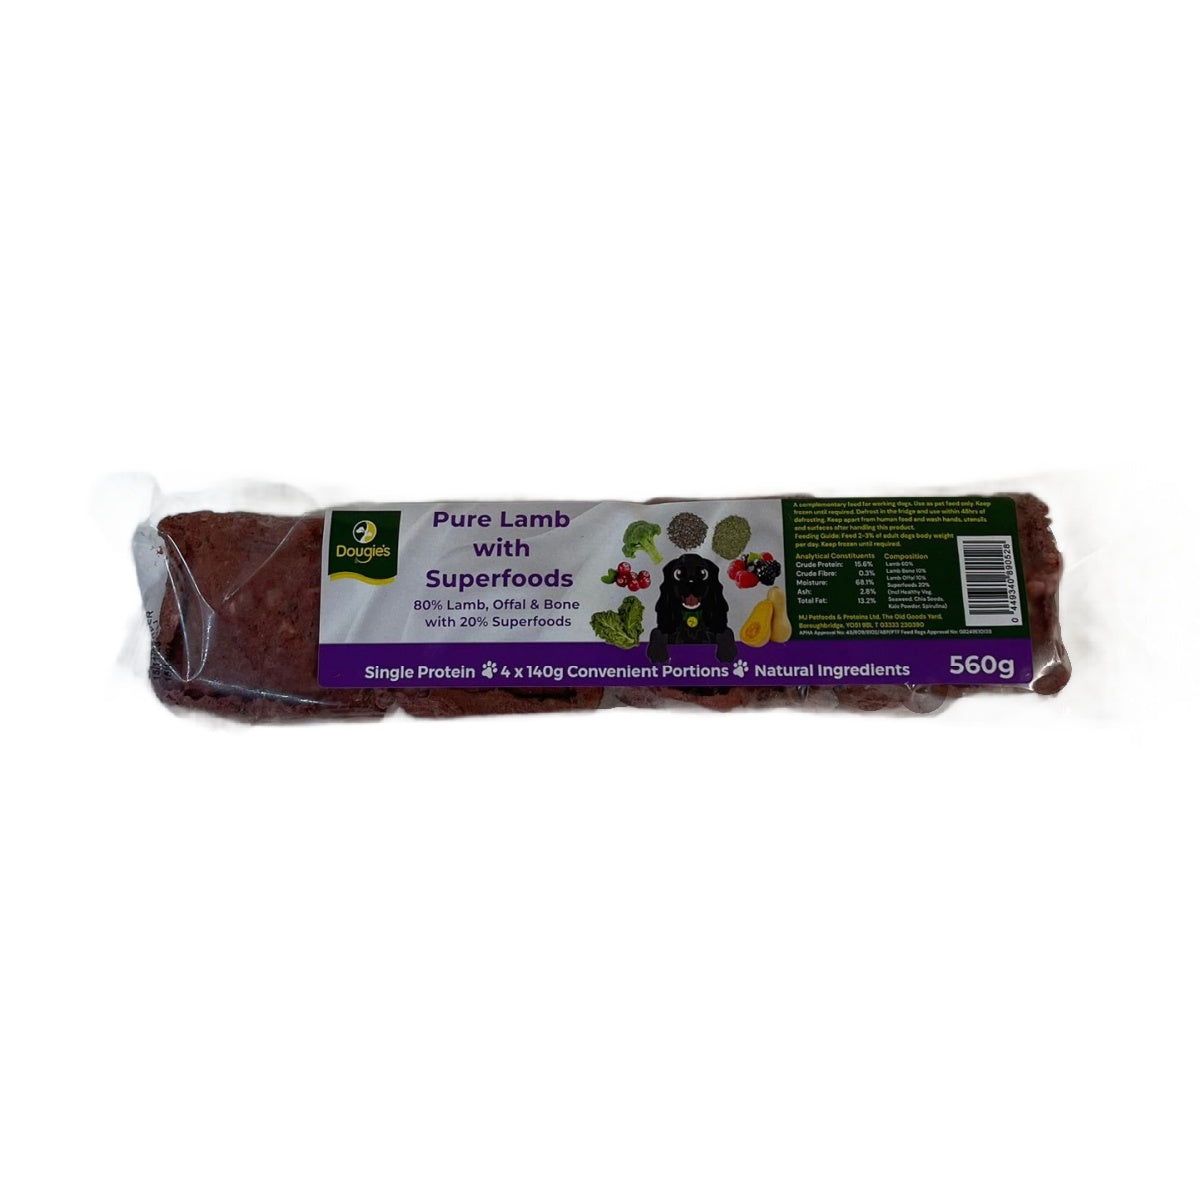 Dougies Pure Lamb with Superfoods 560g